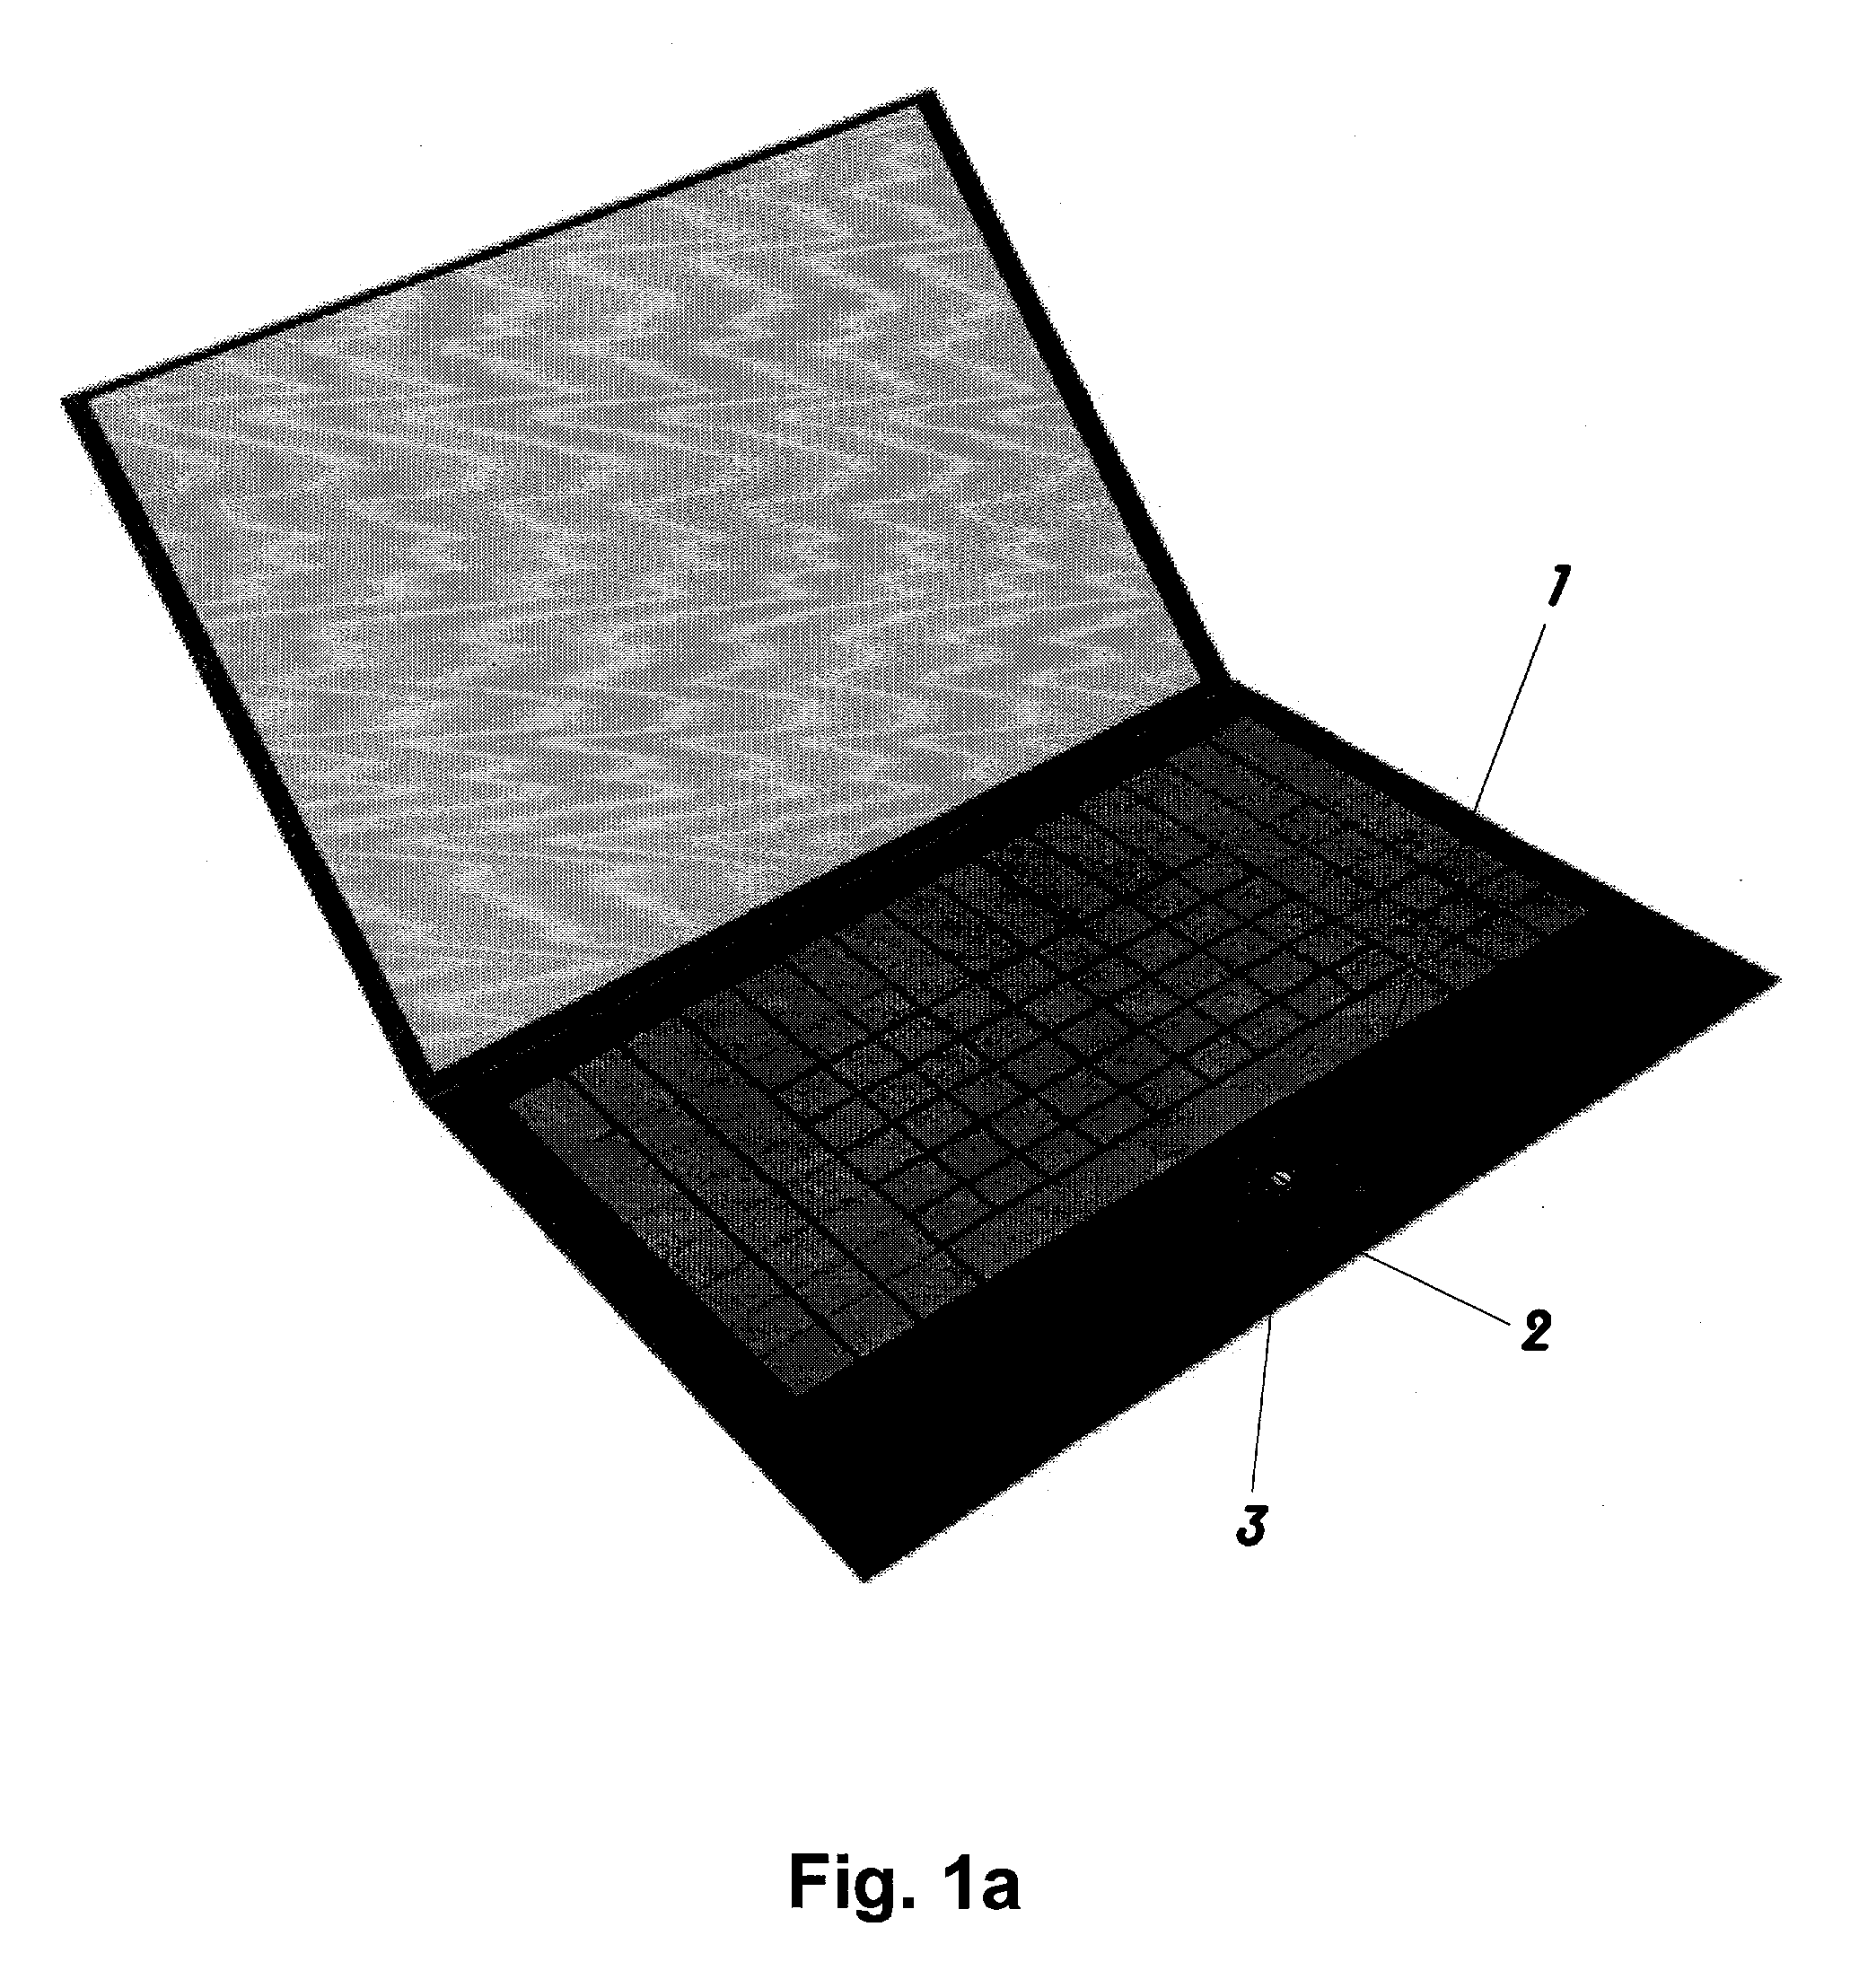 Integrated computer mouse and pad pointing device